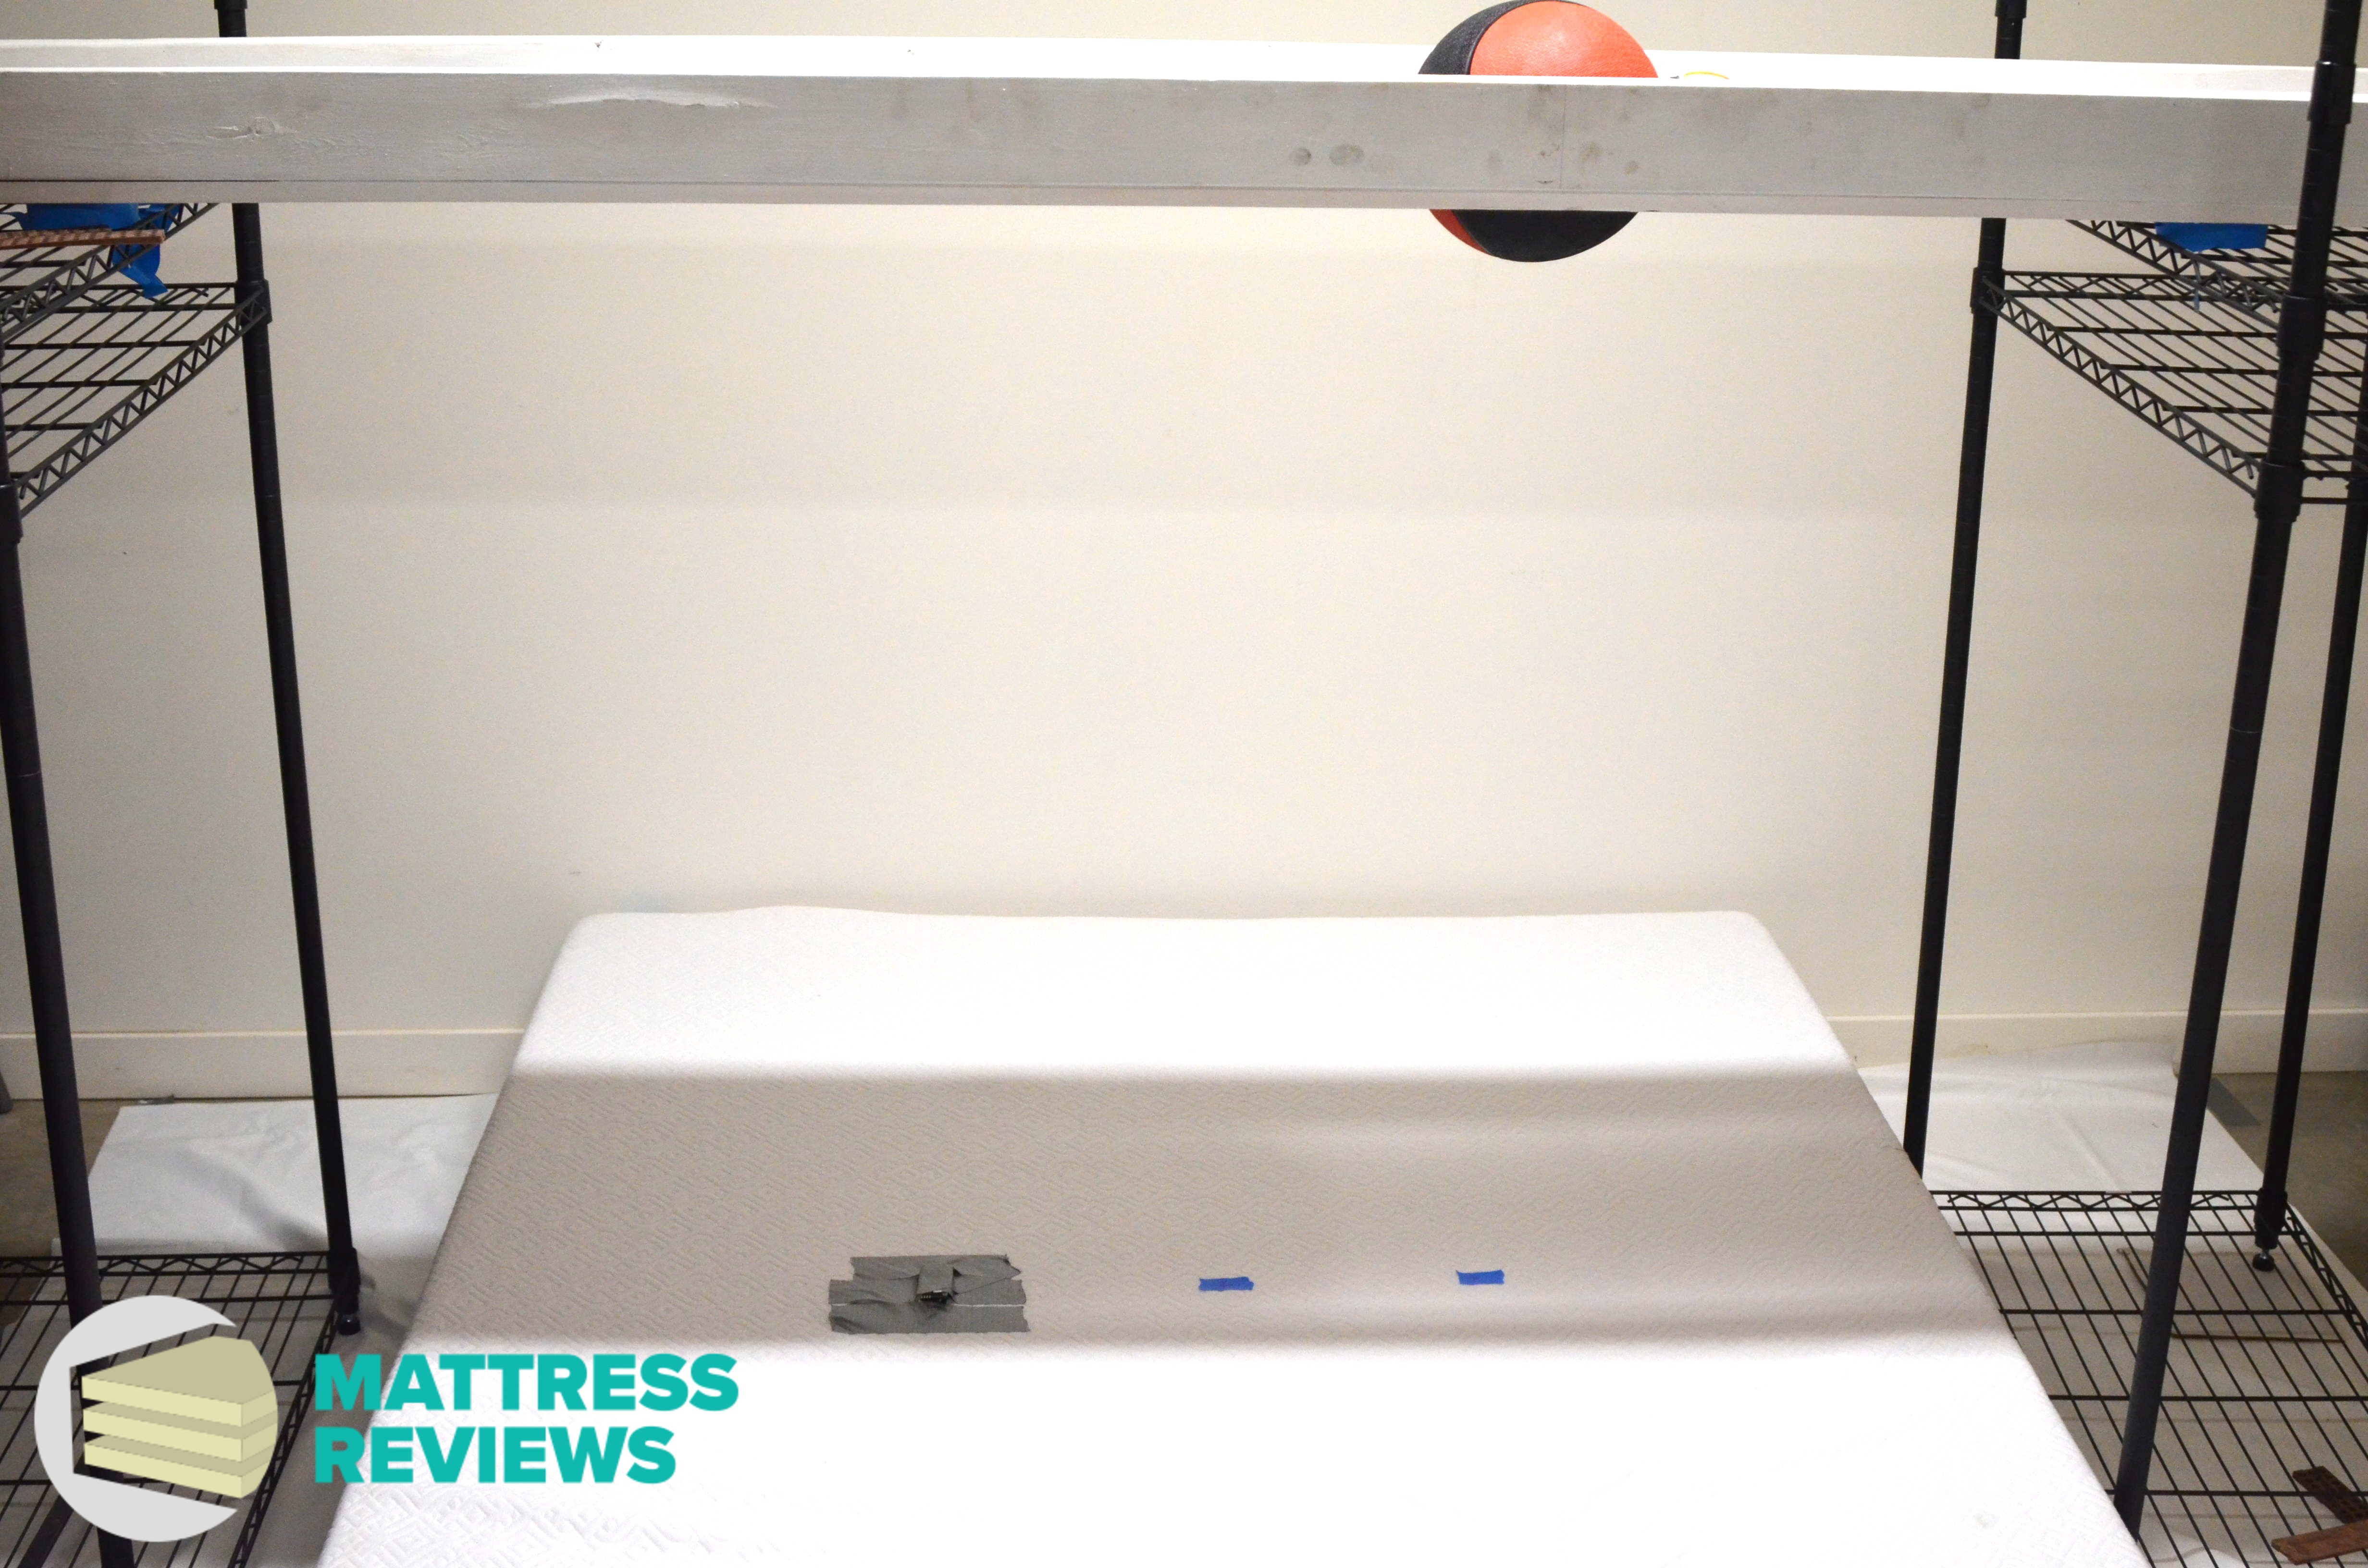 Image of the Lucid mattress motion isolation test.